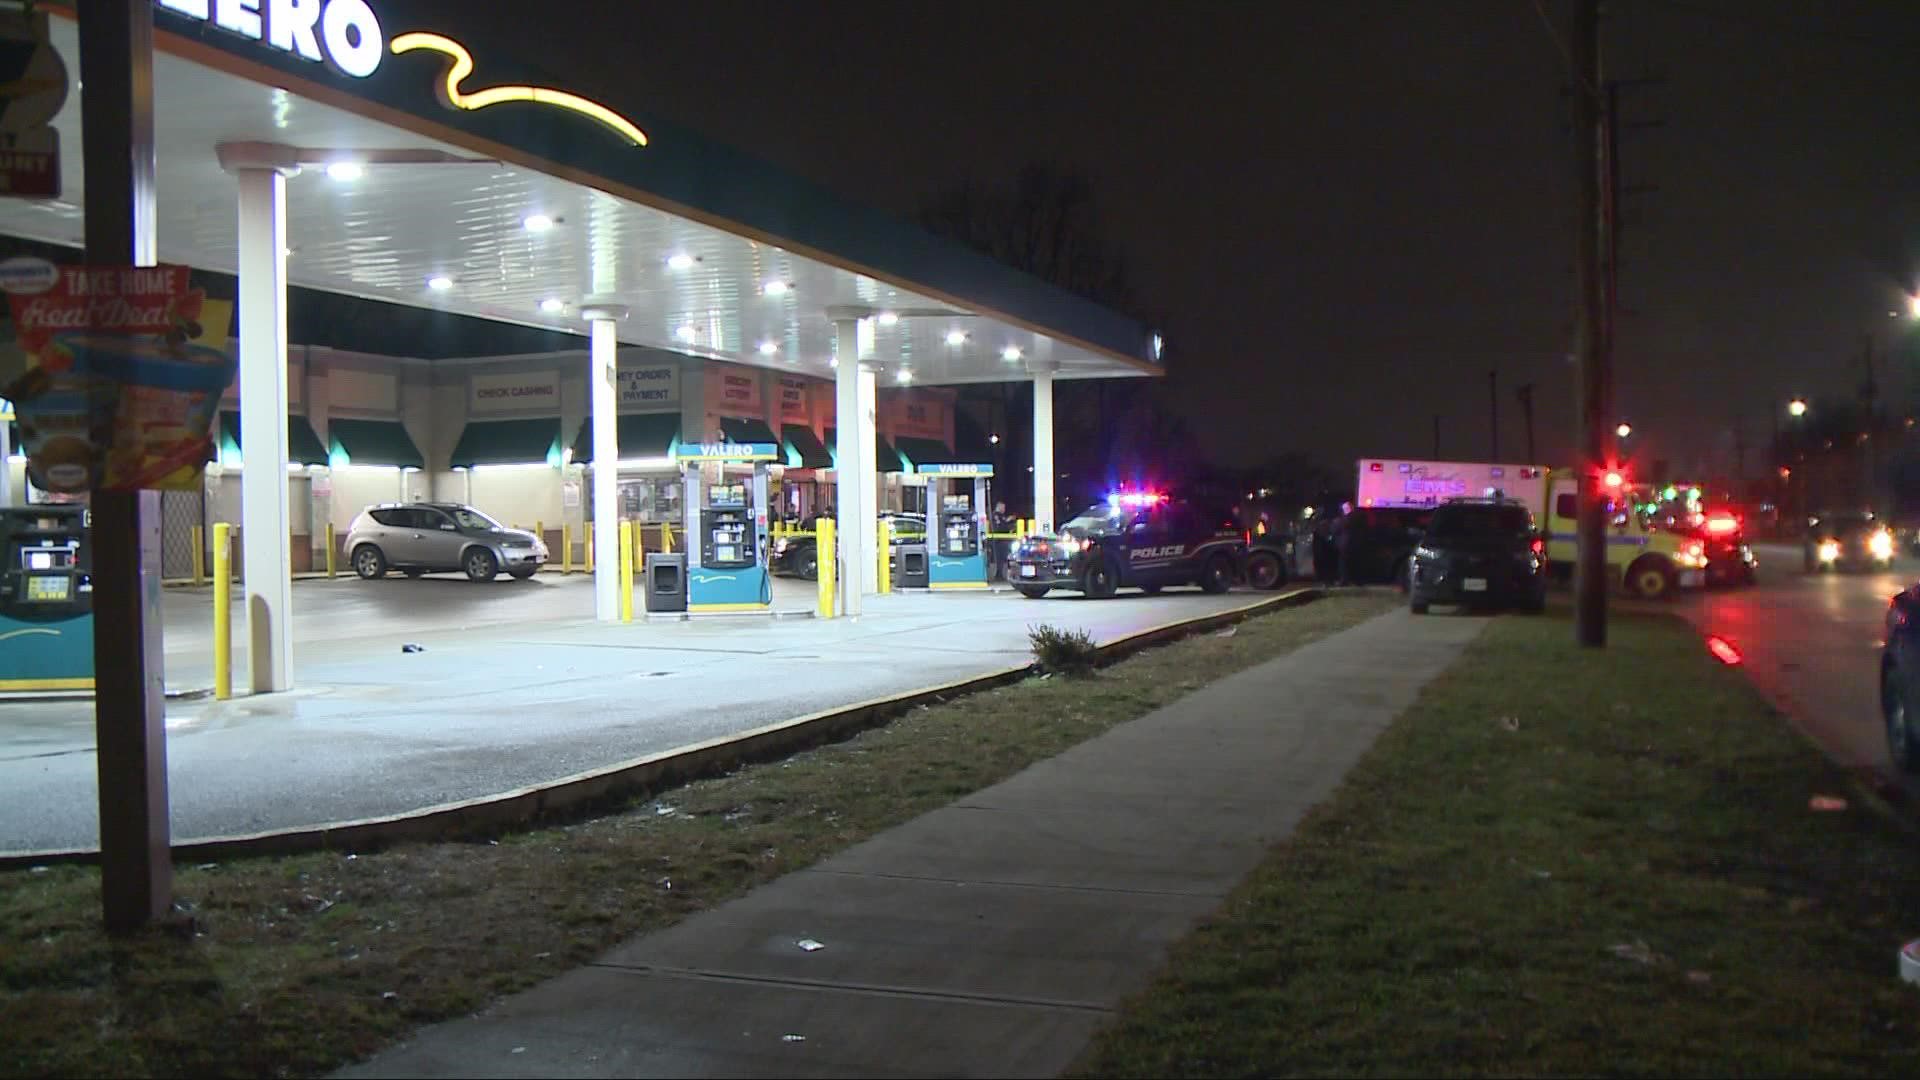 A 33-year-old man was fatally shot at a Valero gas station in Cleveland on Monday.